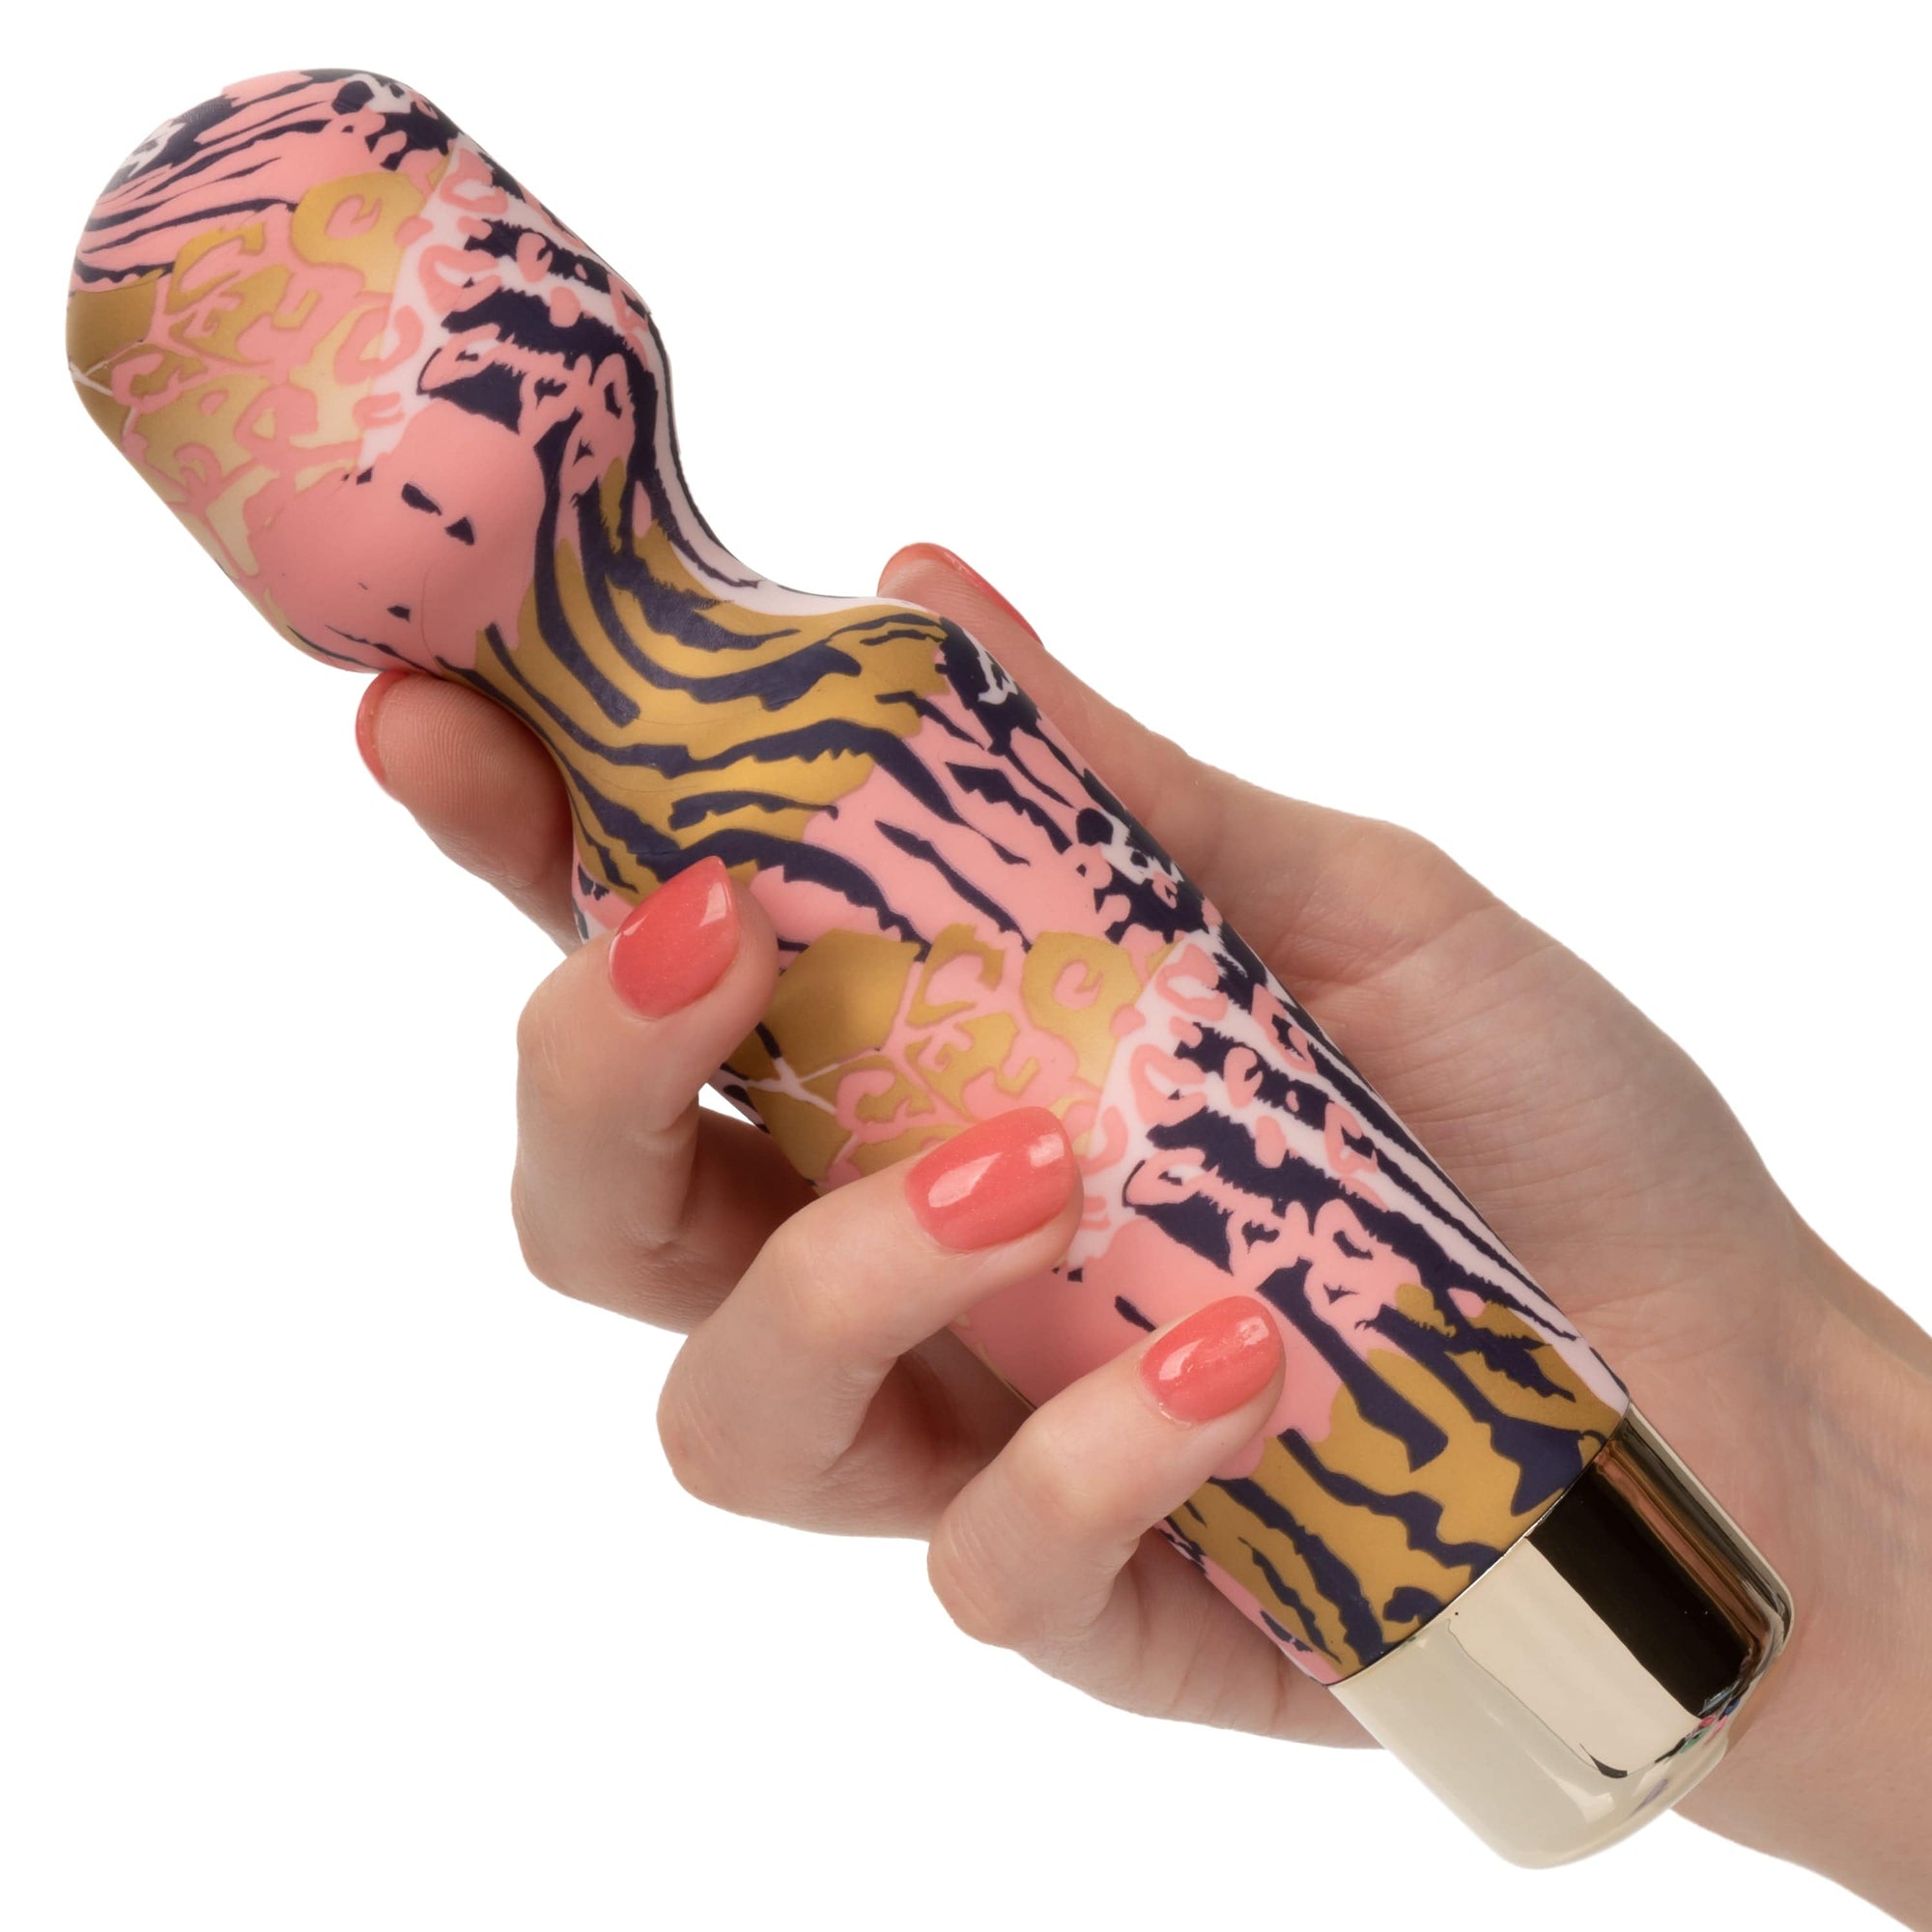 California Exotics - Naughty Bits WTF Wand To Fuck Wand Massager (Multi Colour) -  Wand Massagers (Vibration) Non Rechargeable  Durio.sg